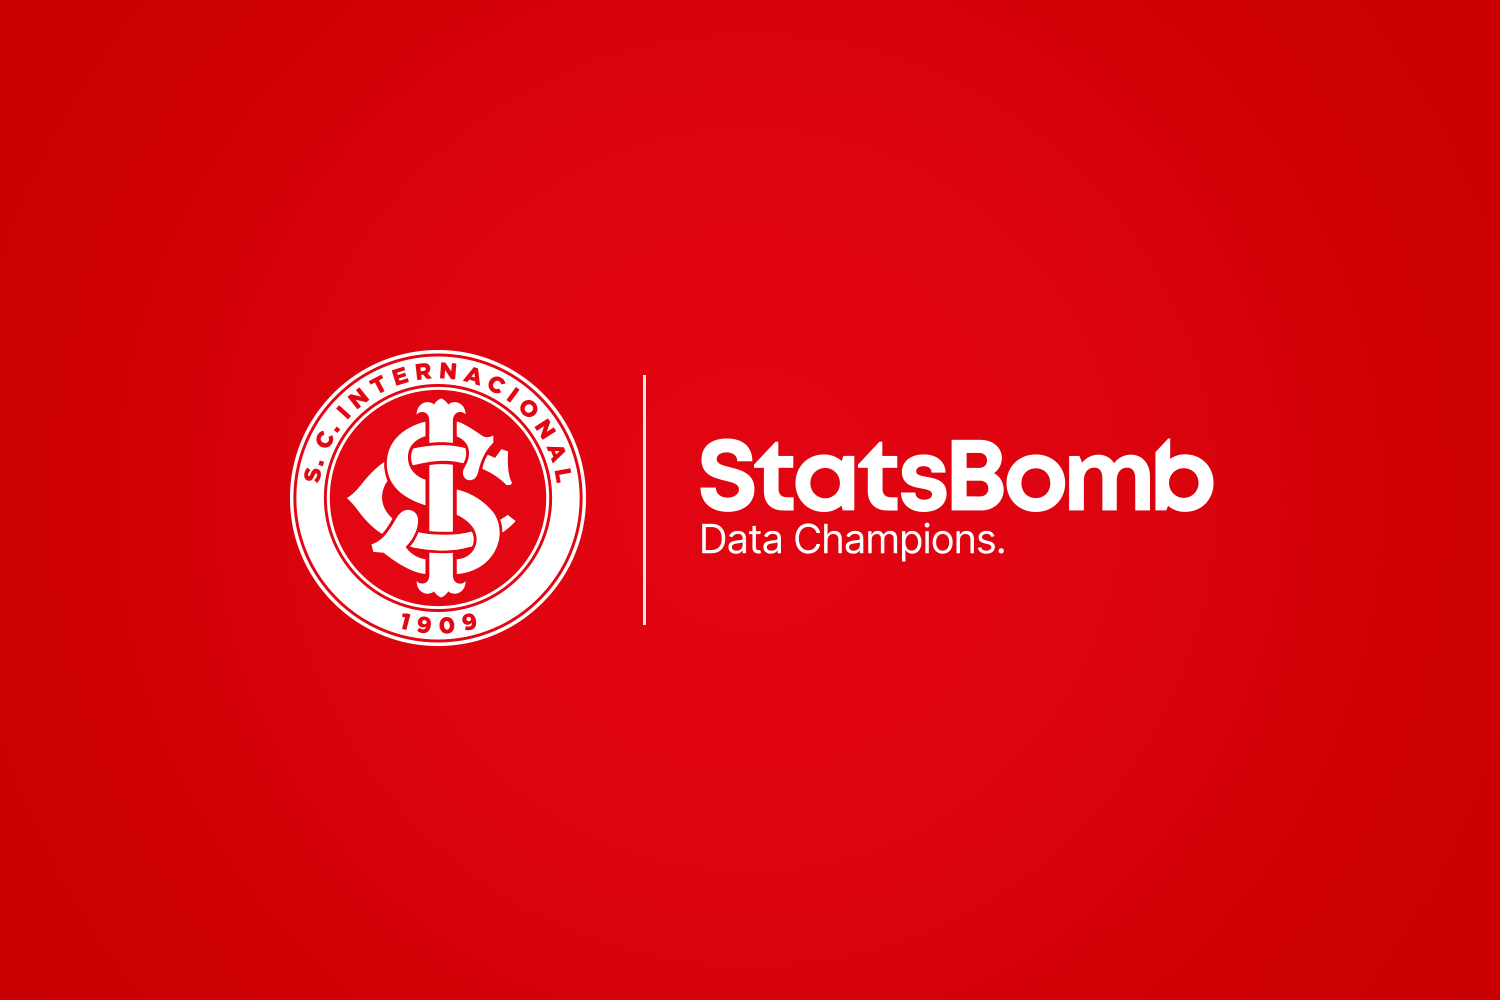 StatsBomb Continues Expansion In The Brazilian Market With SC Internacional Agreement